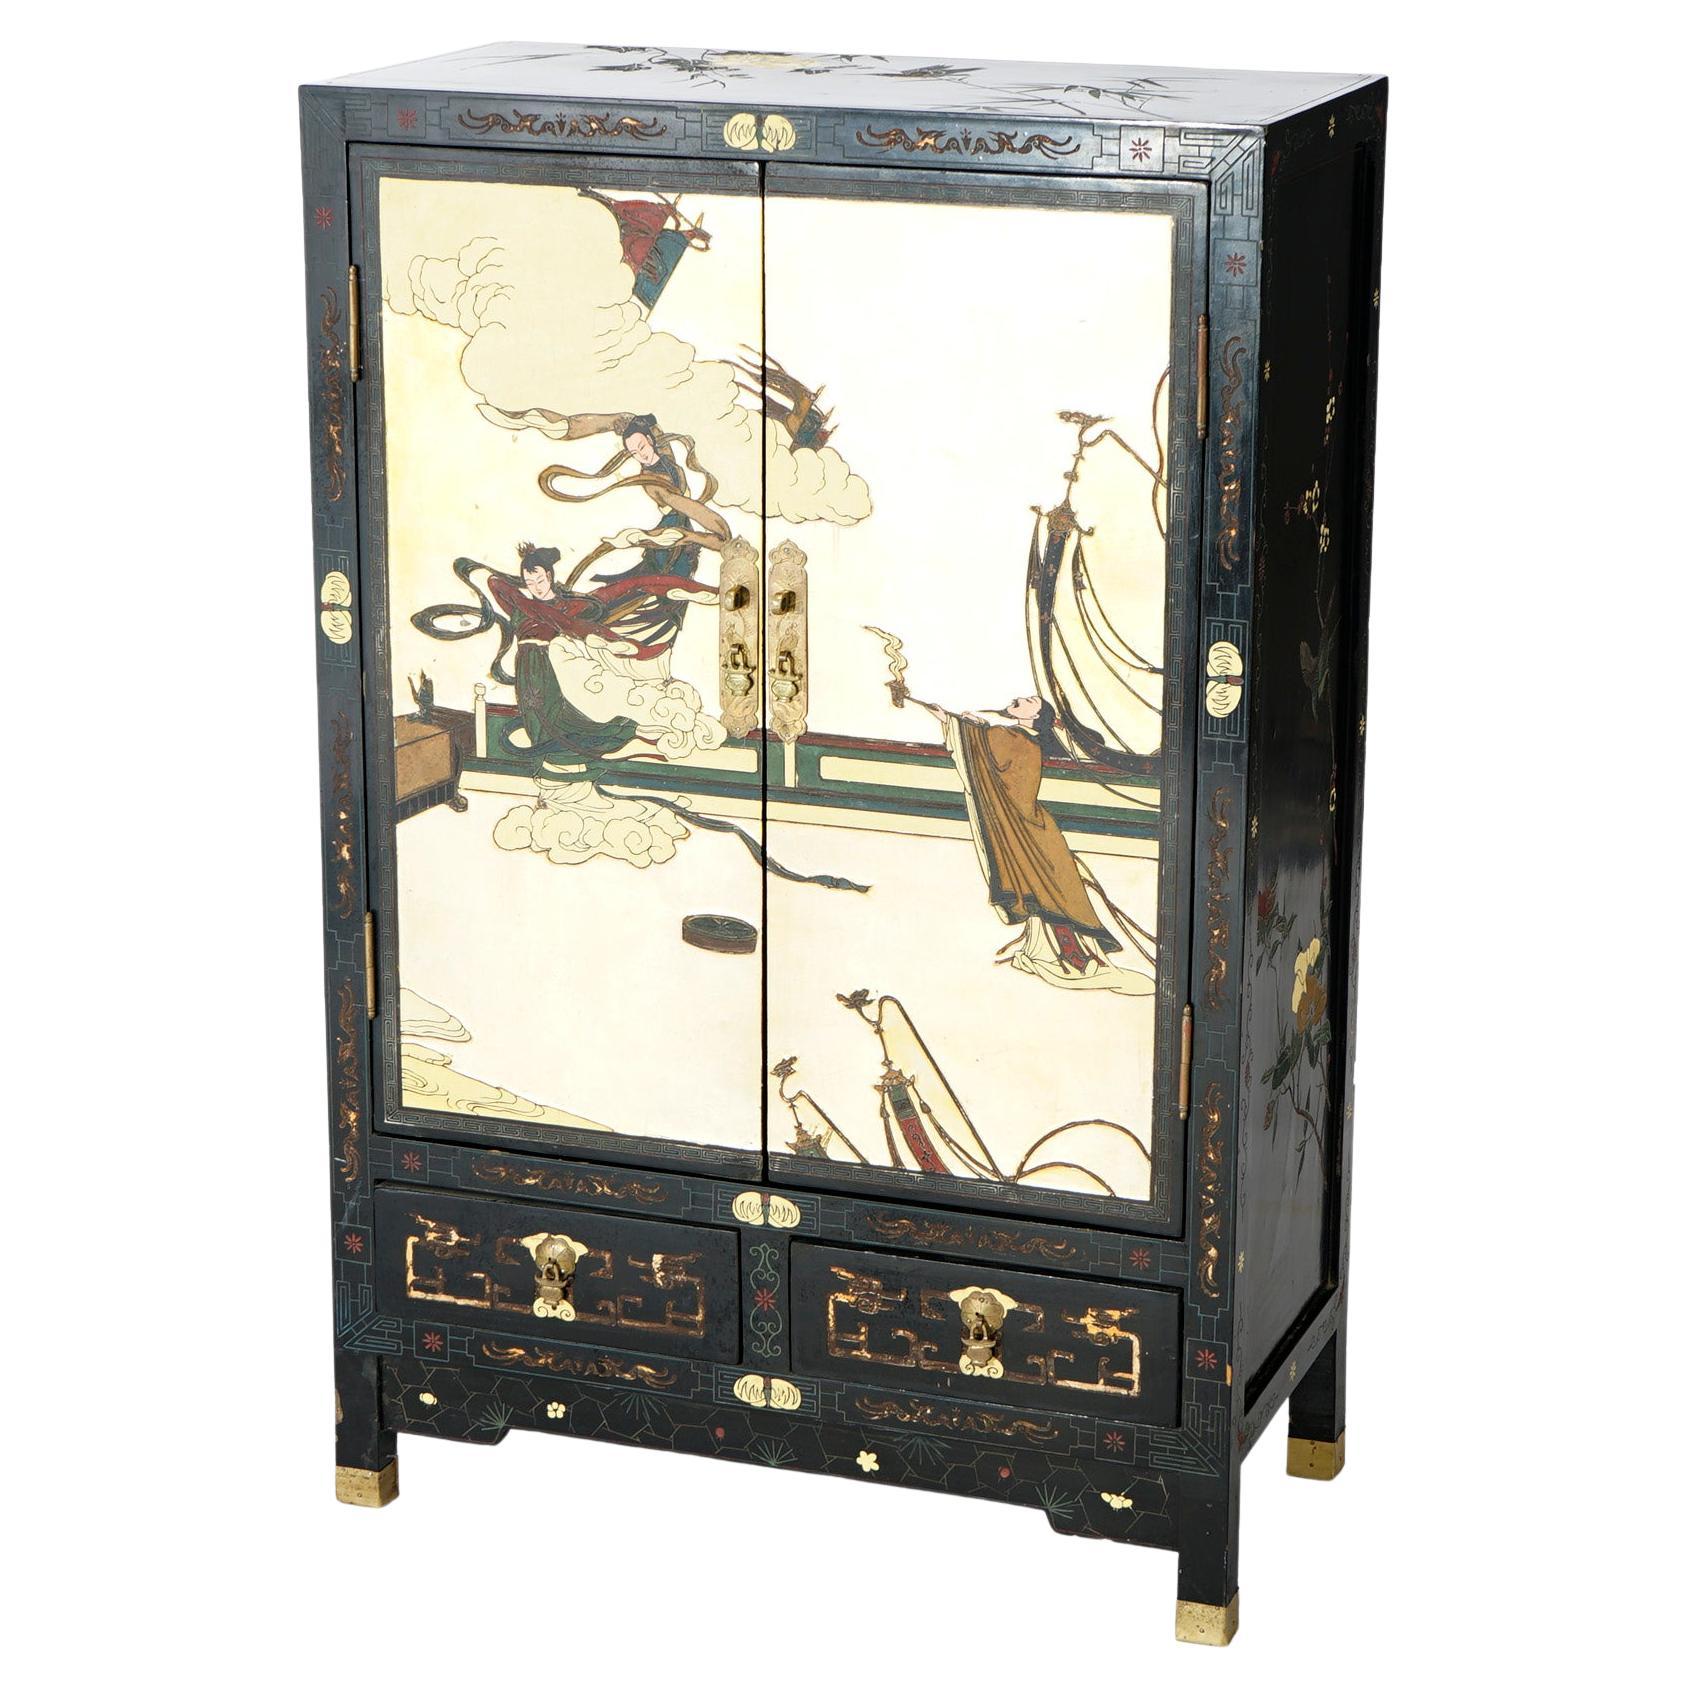 Chinoiserie Decorated Black Lacquer Cabinet with Spiritual Scene, 20th C